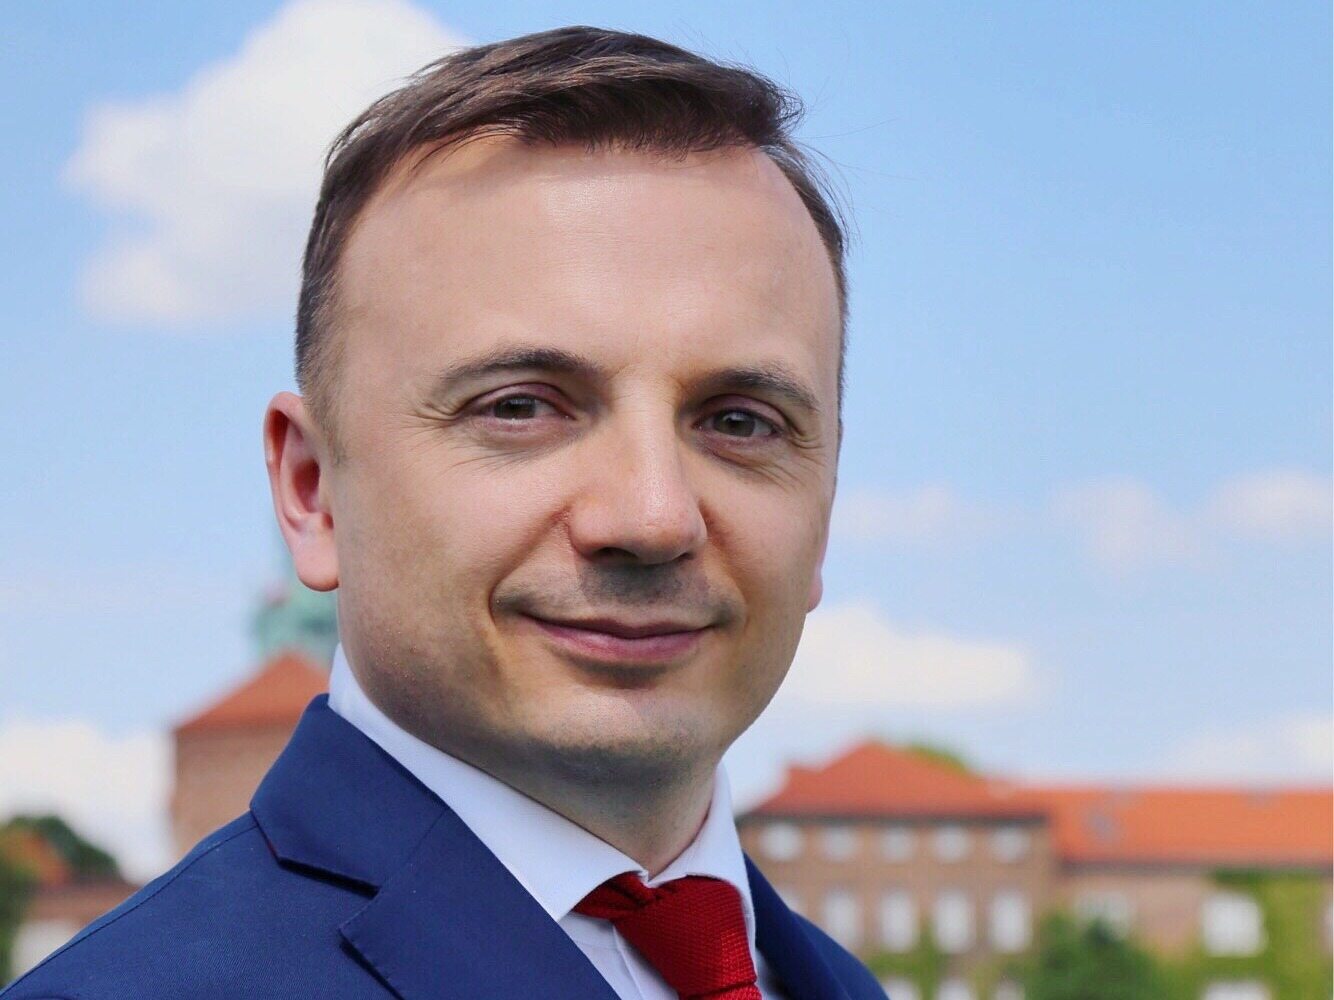 Łukasz Gibała is a candidate for the president of Krakow.  He received the support of the Razem MP